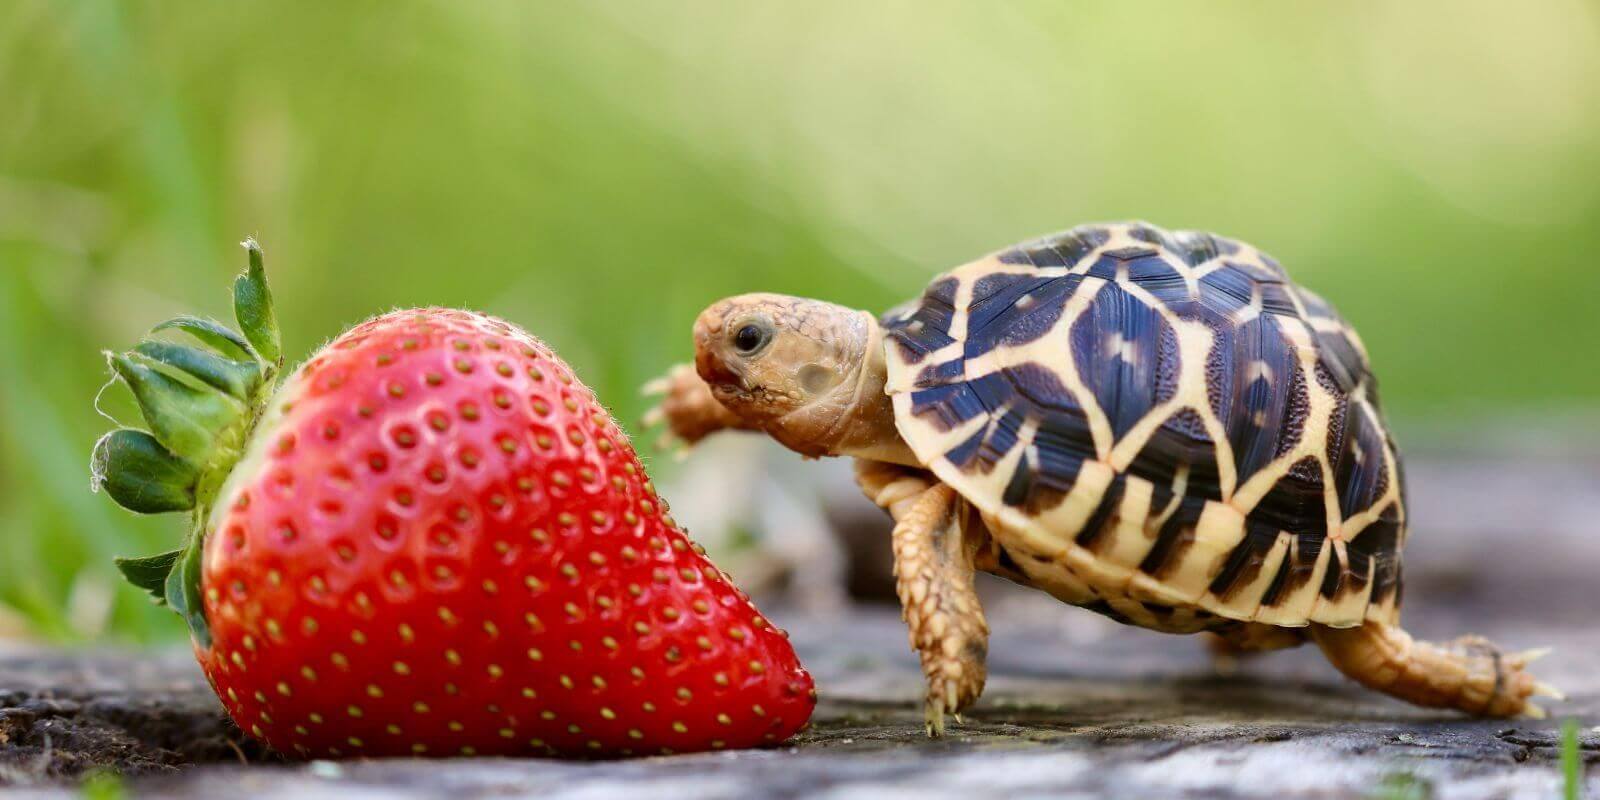 baby tortoise the size of a strawberry